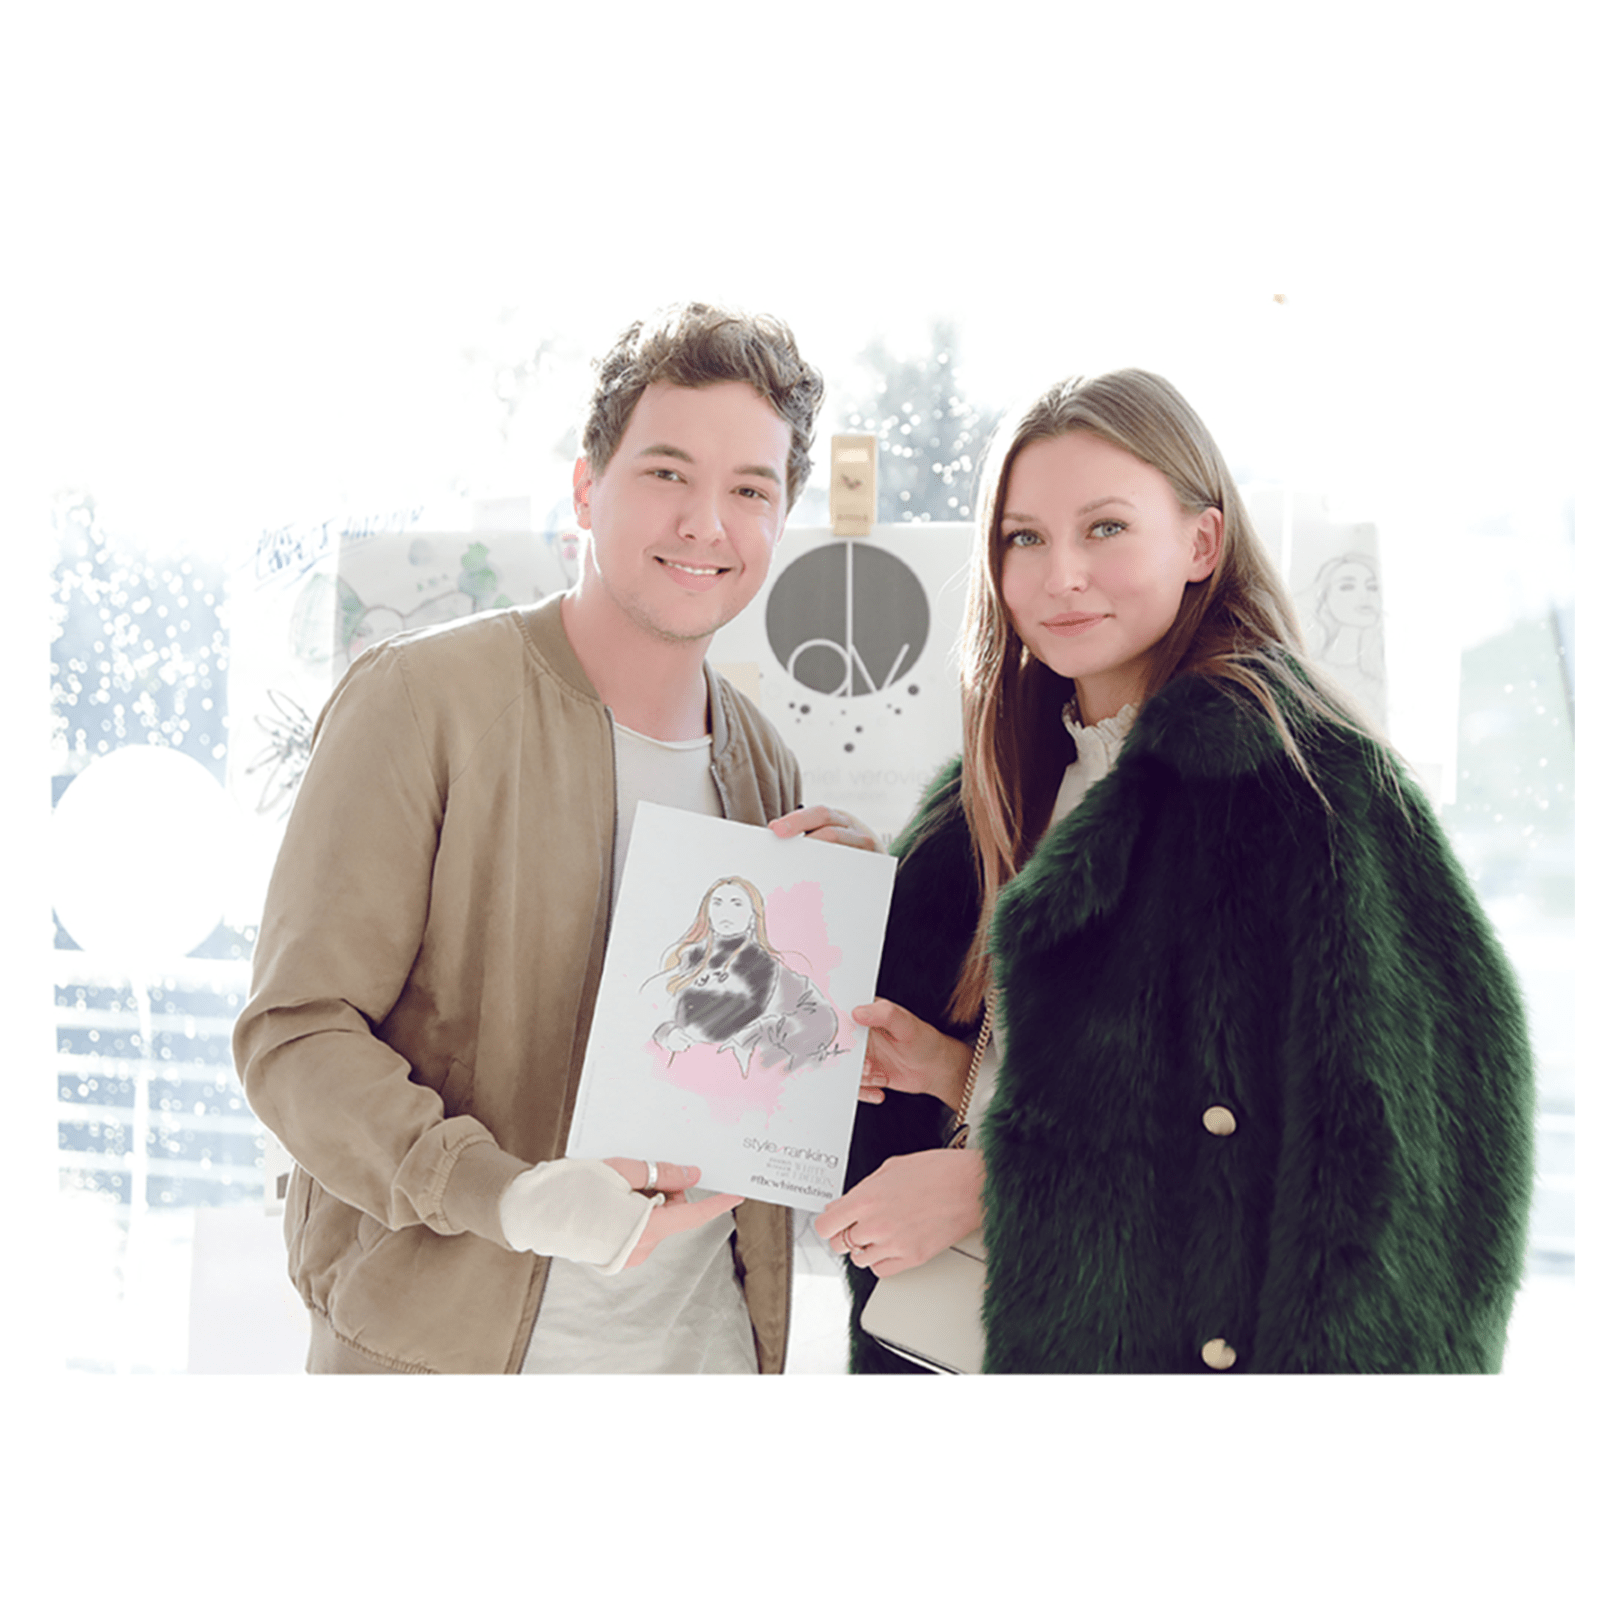 Influencer-Live Drawing at the FashionBloggerCafé WHITE EDITION during Berlin Fashion Week. // Digital //